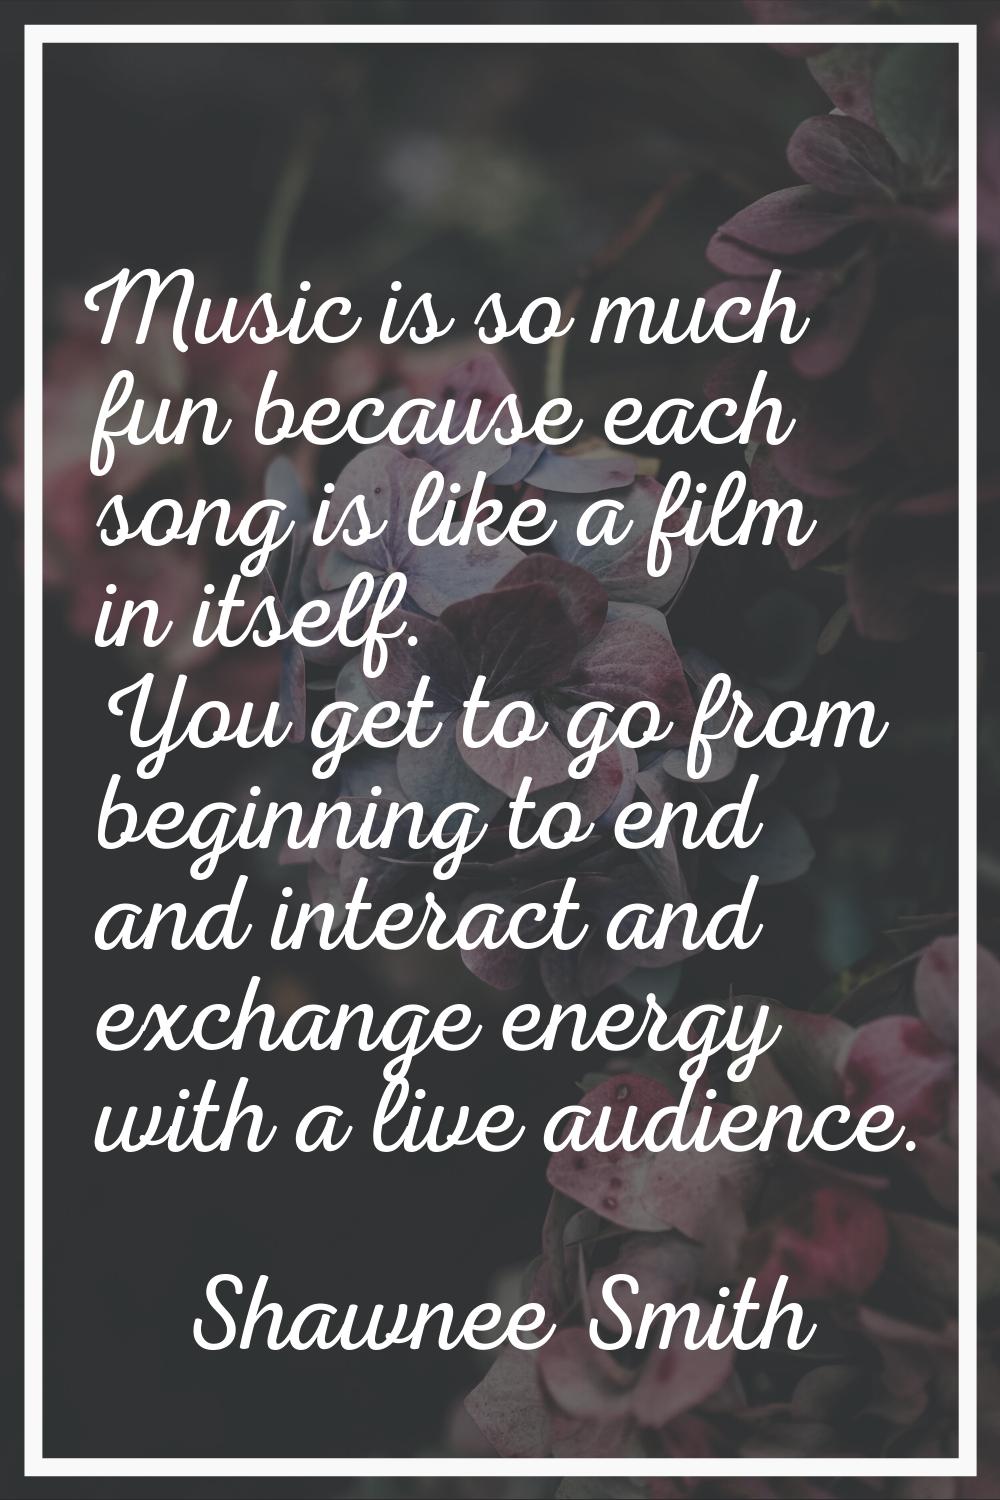 Music is so much fun because each song is like a film in itself. You get to go from beginning to en